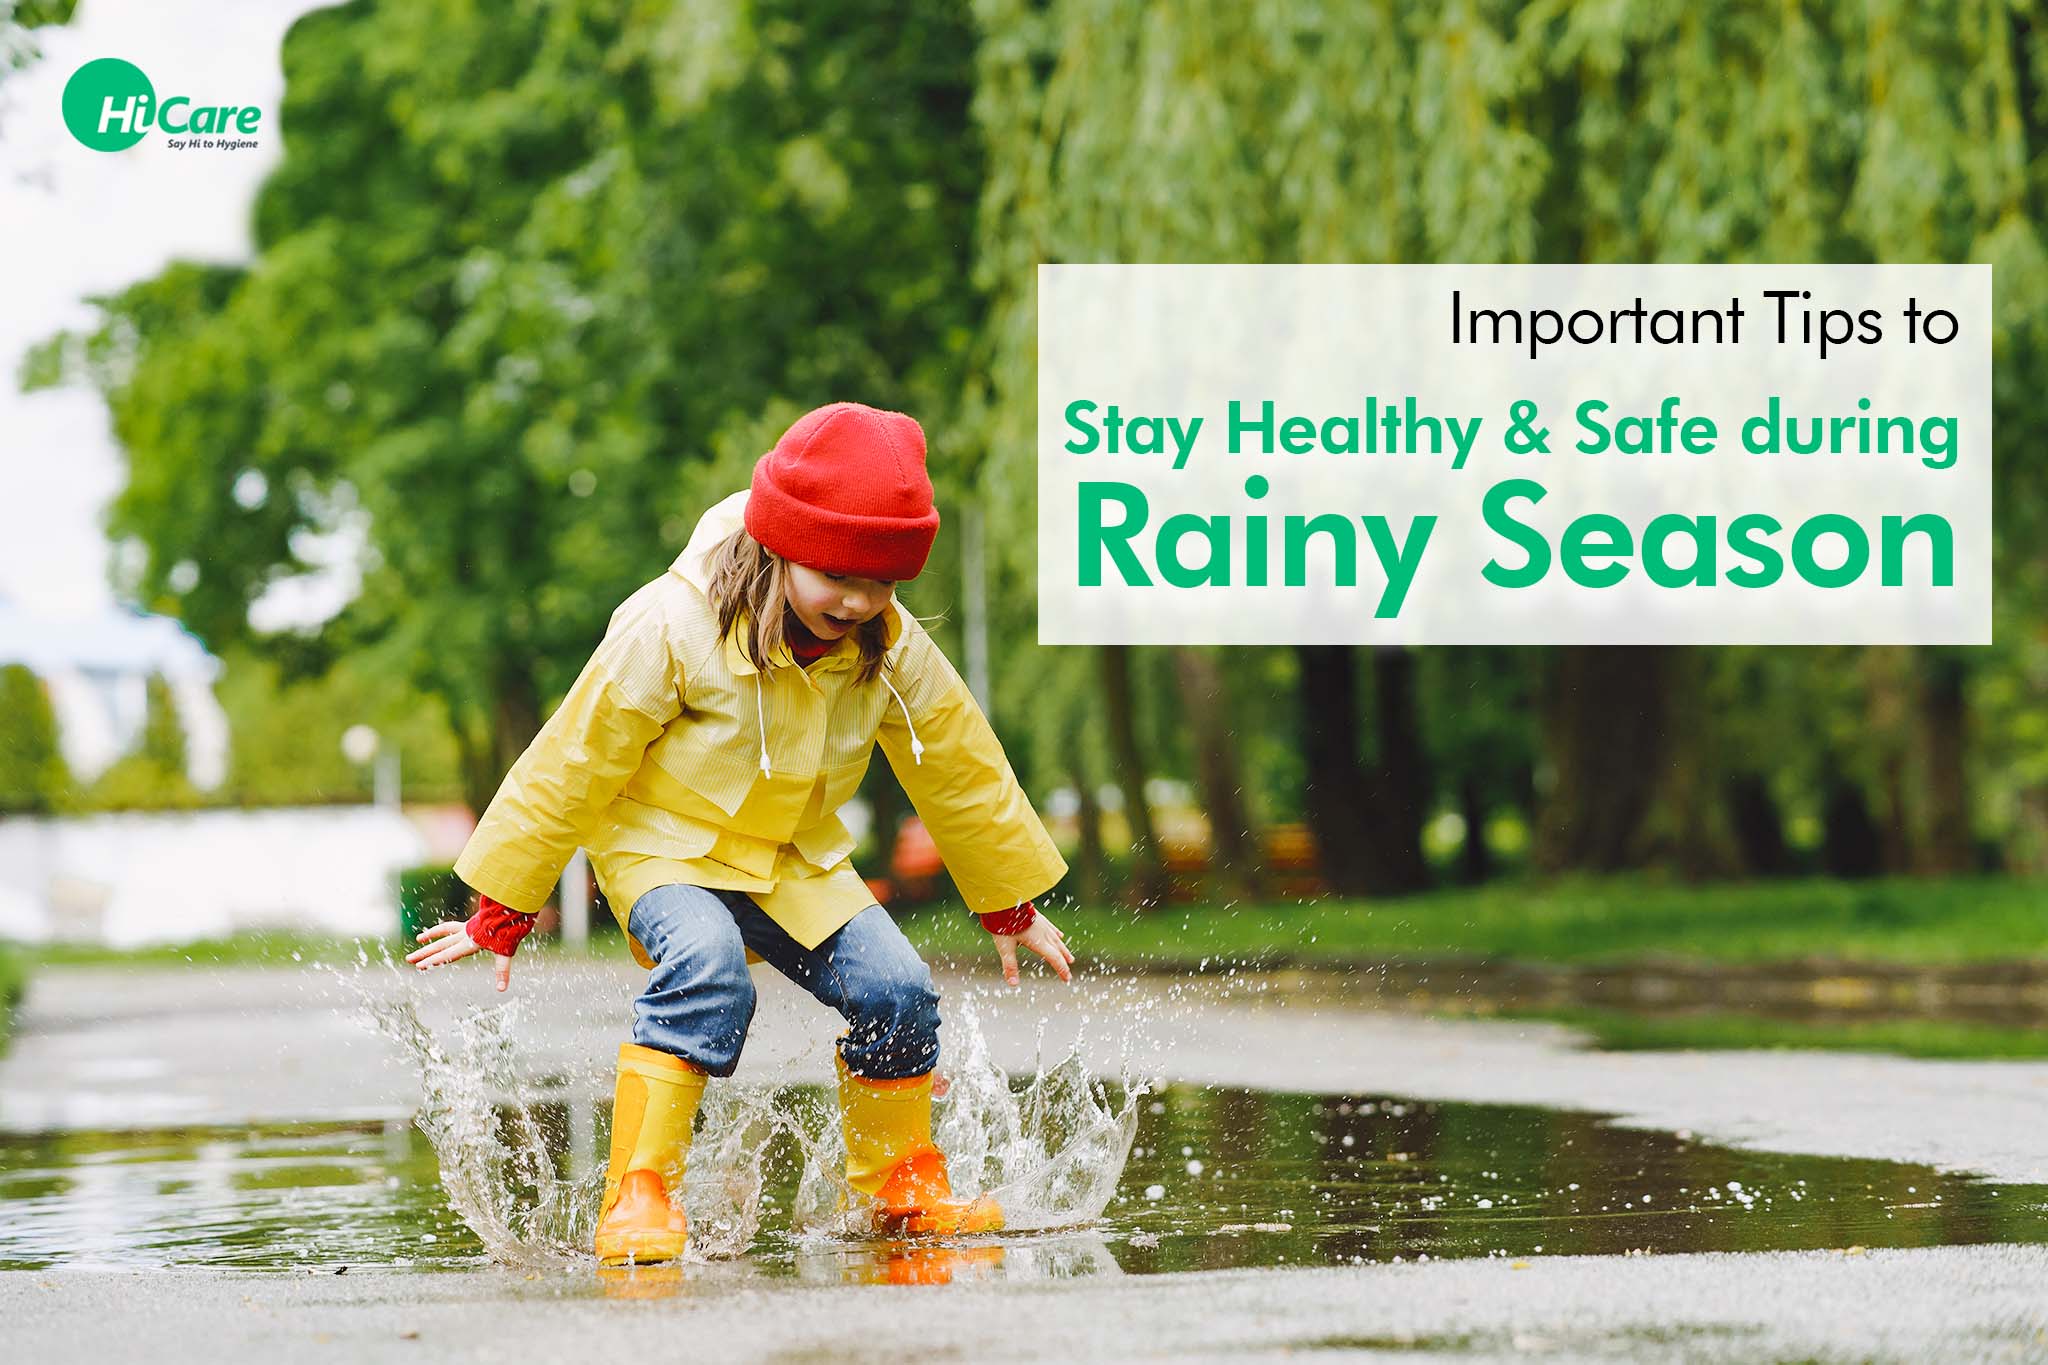 Top 10 Health Care Tips to Stay Healthy in Rainy Season HiCare